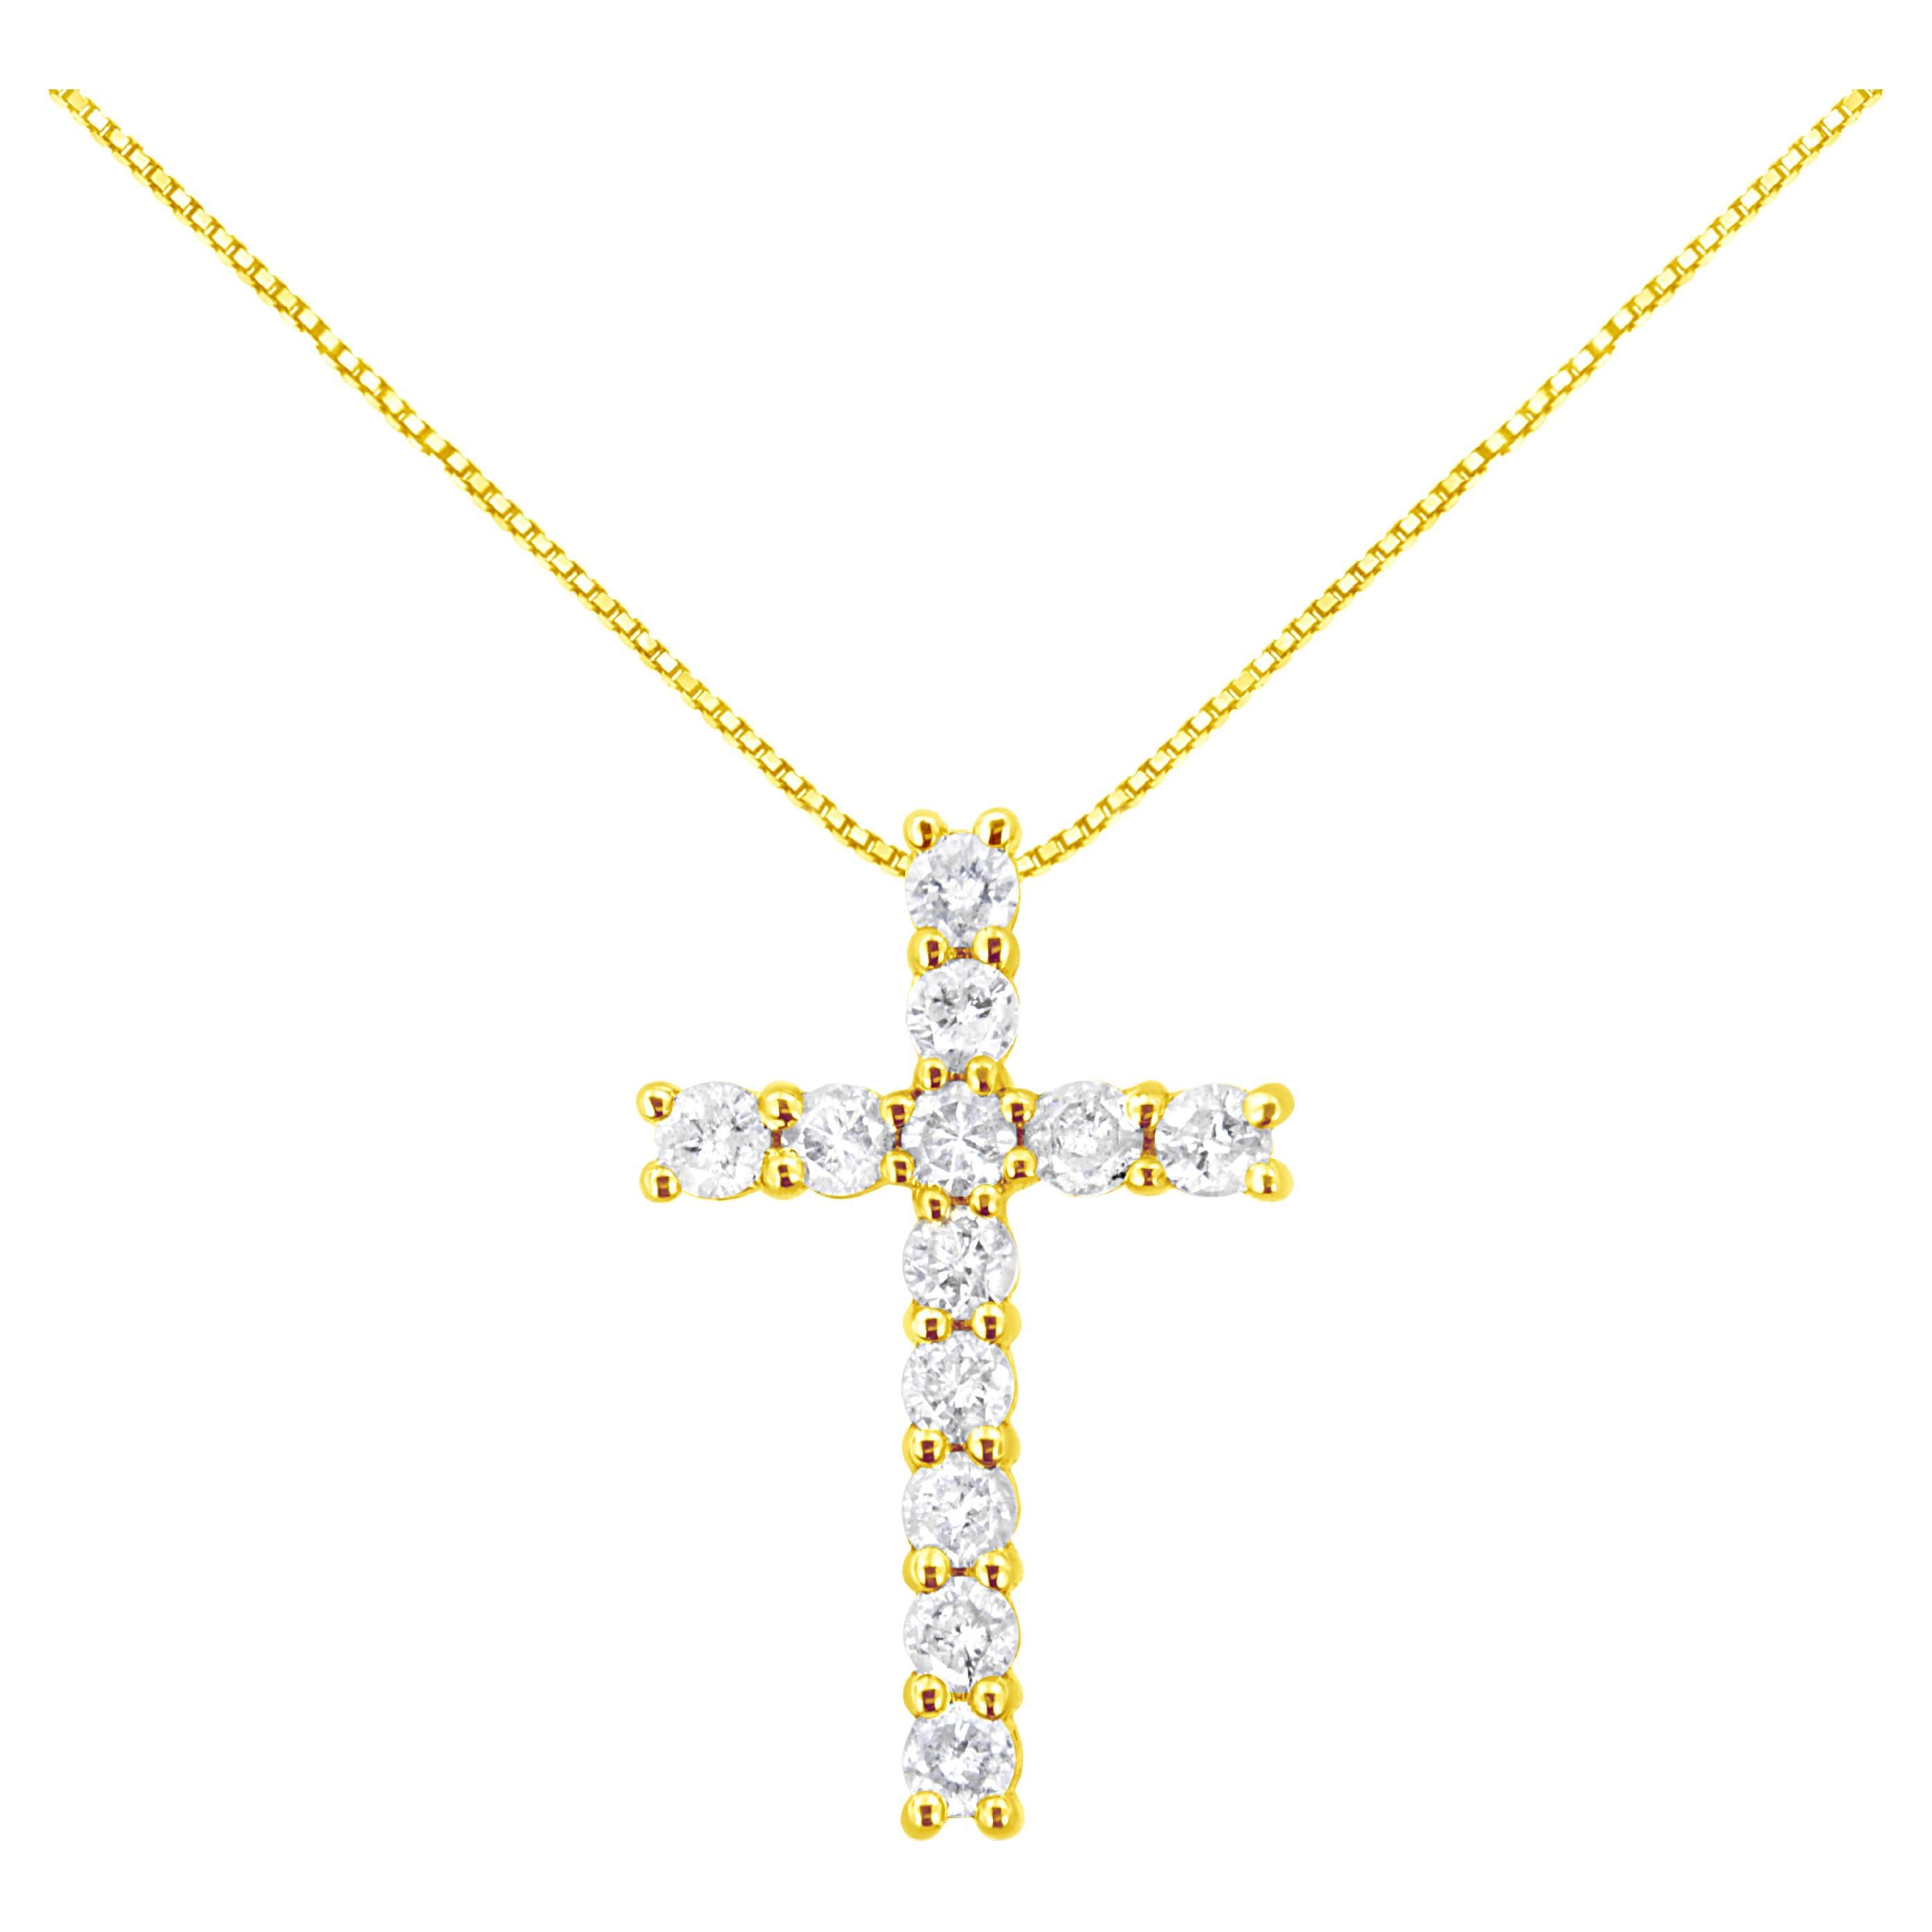 Yellow Gold Plated Sterling Silver 1.0 Carat Diamond Cross Pendant Necklace